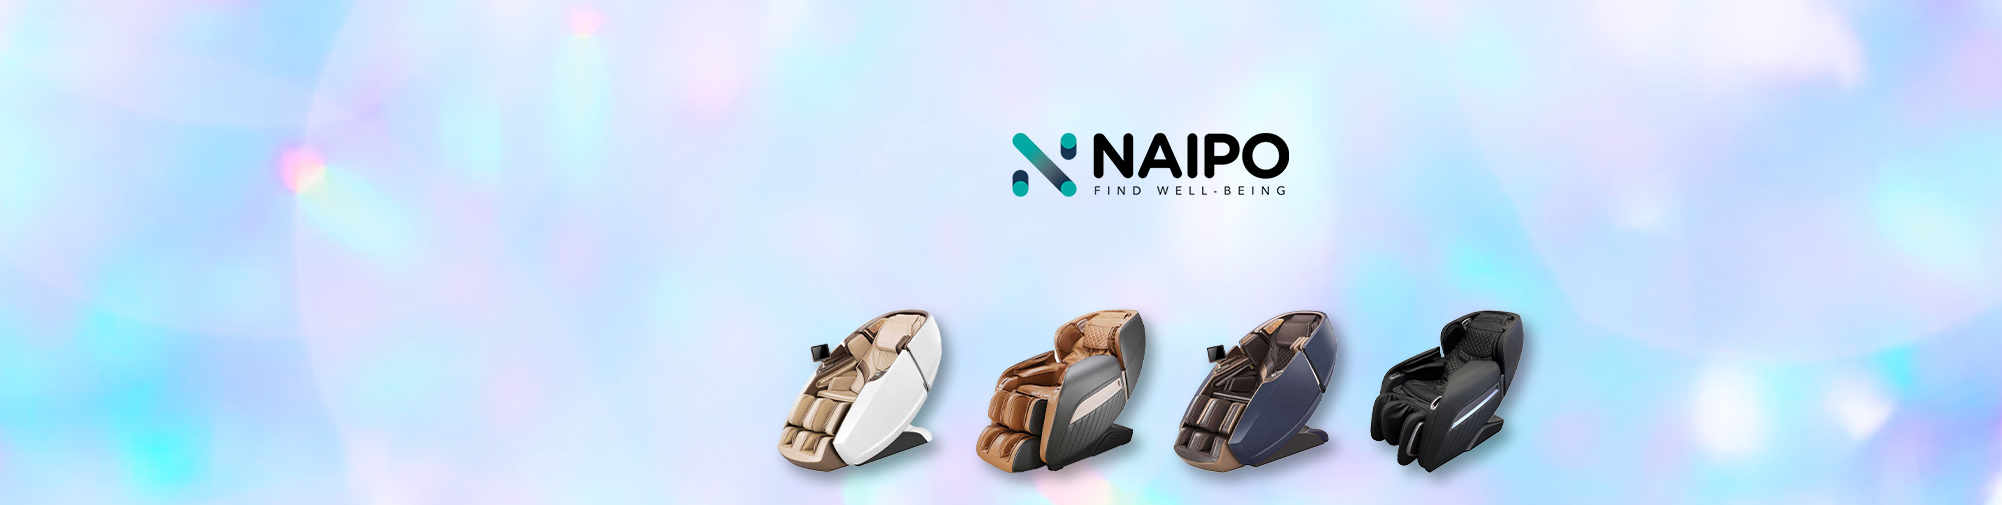 NAIPO - Massage products for the whole world | Massage chair world